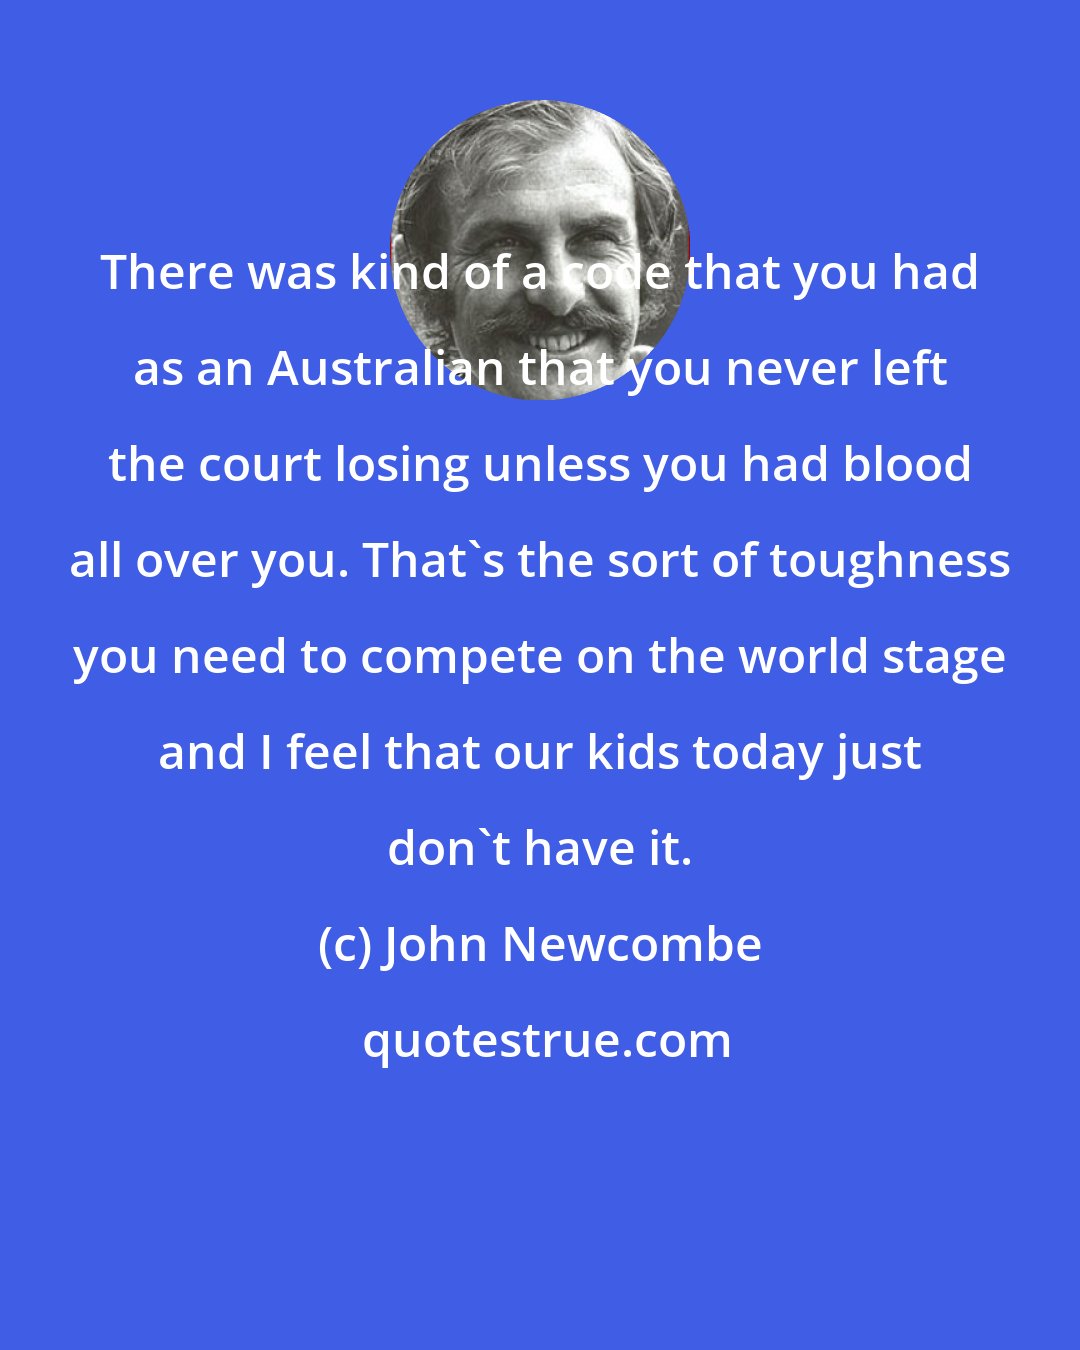 John Newcombe: There was kind of a code that you had as an Australian that you never left the court losing unless you had blood all over you. That's the sort of toughness you need to compete on the world stage and I feel that our kids today just don't have it.